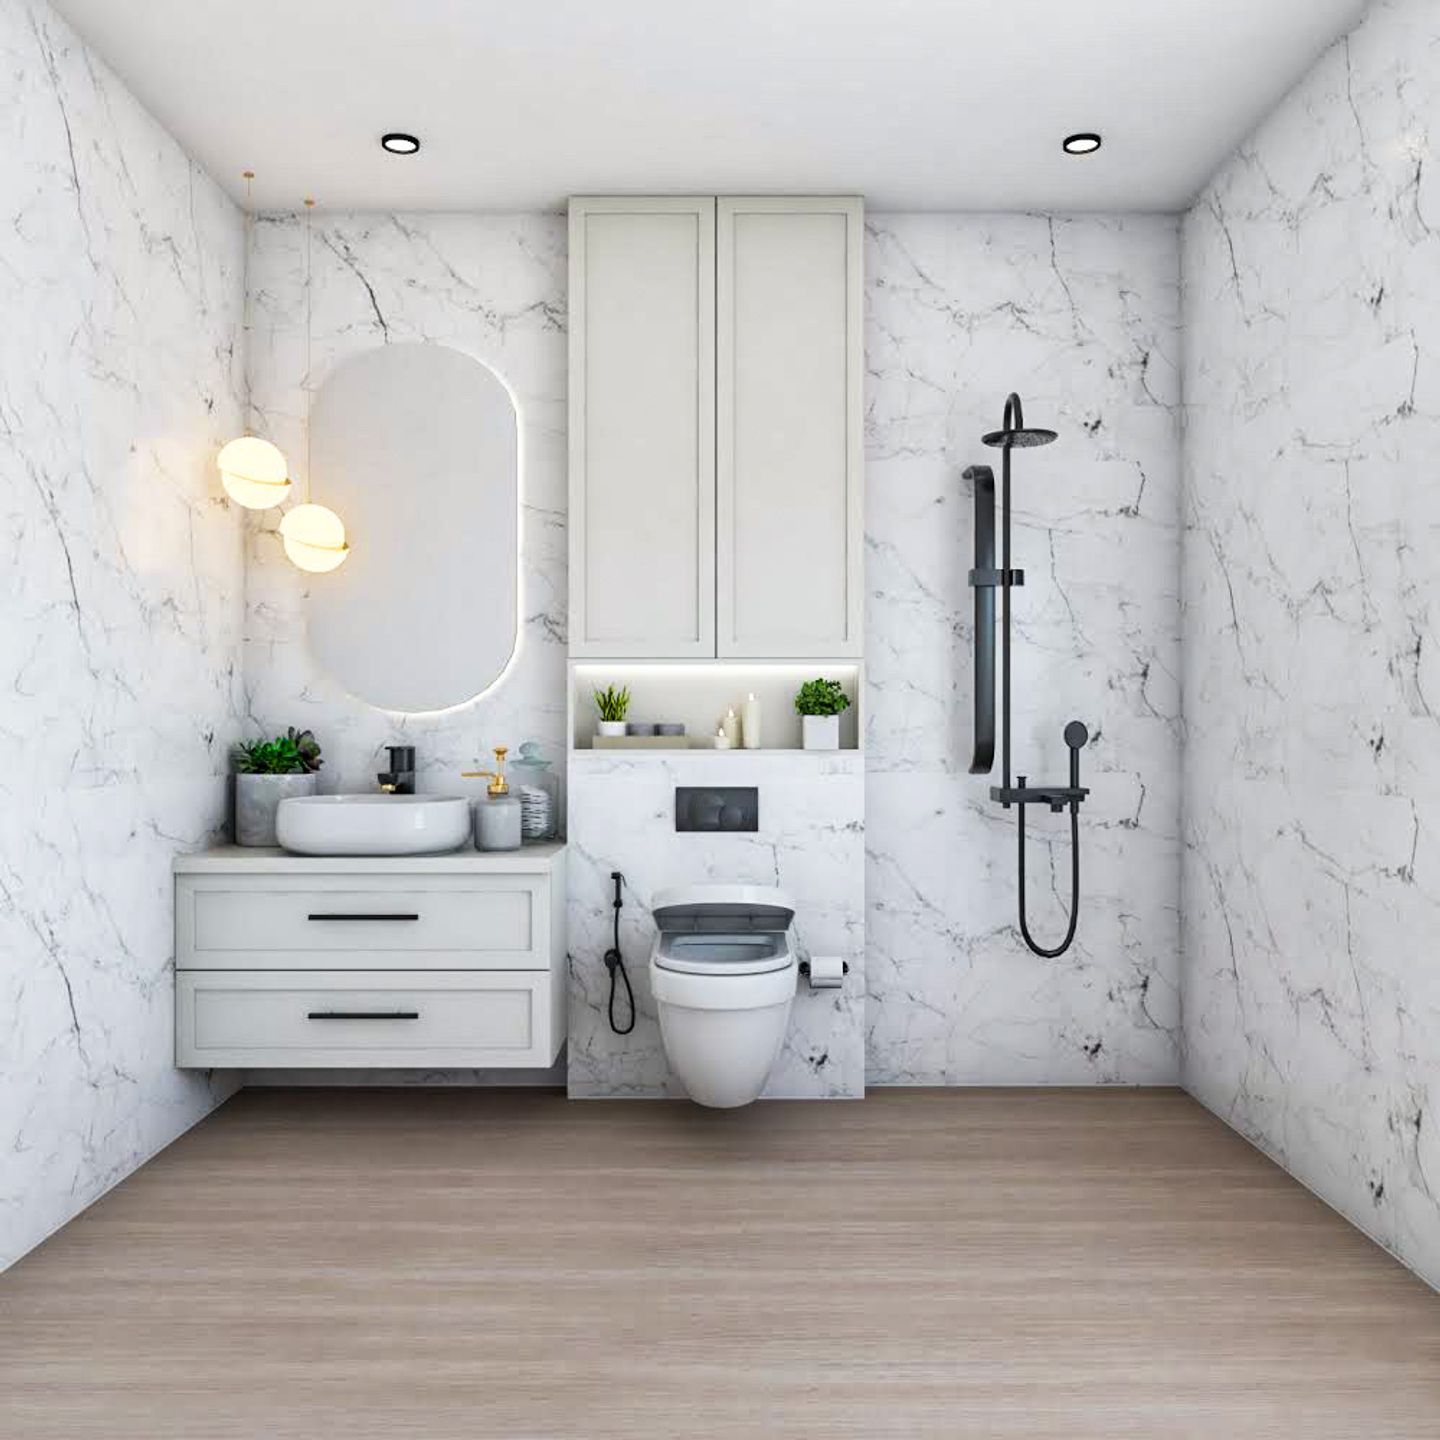 Bathroom Design With Off-White Storage Units And Pendant Lights - Livspace